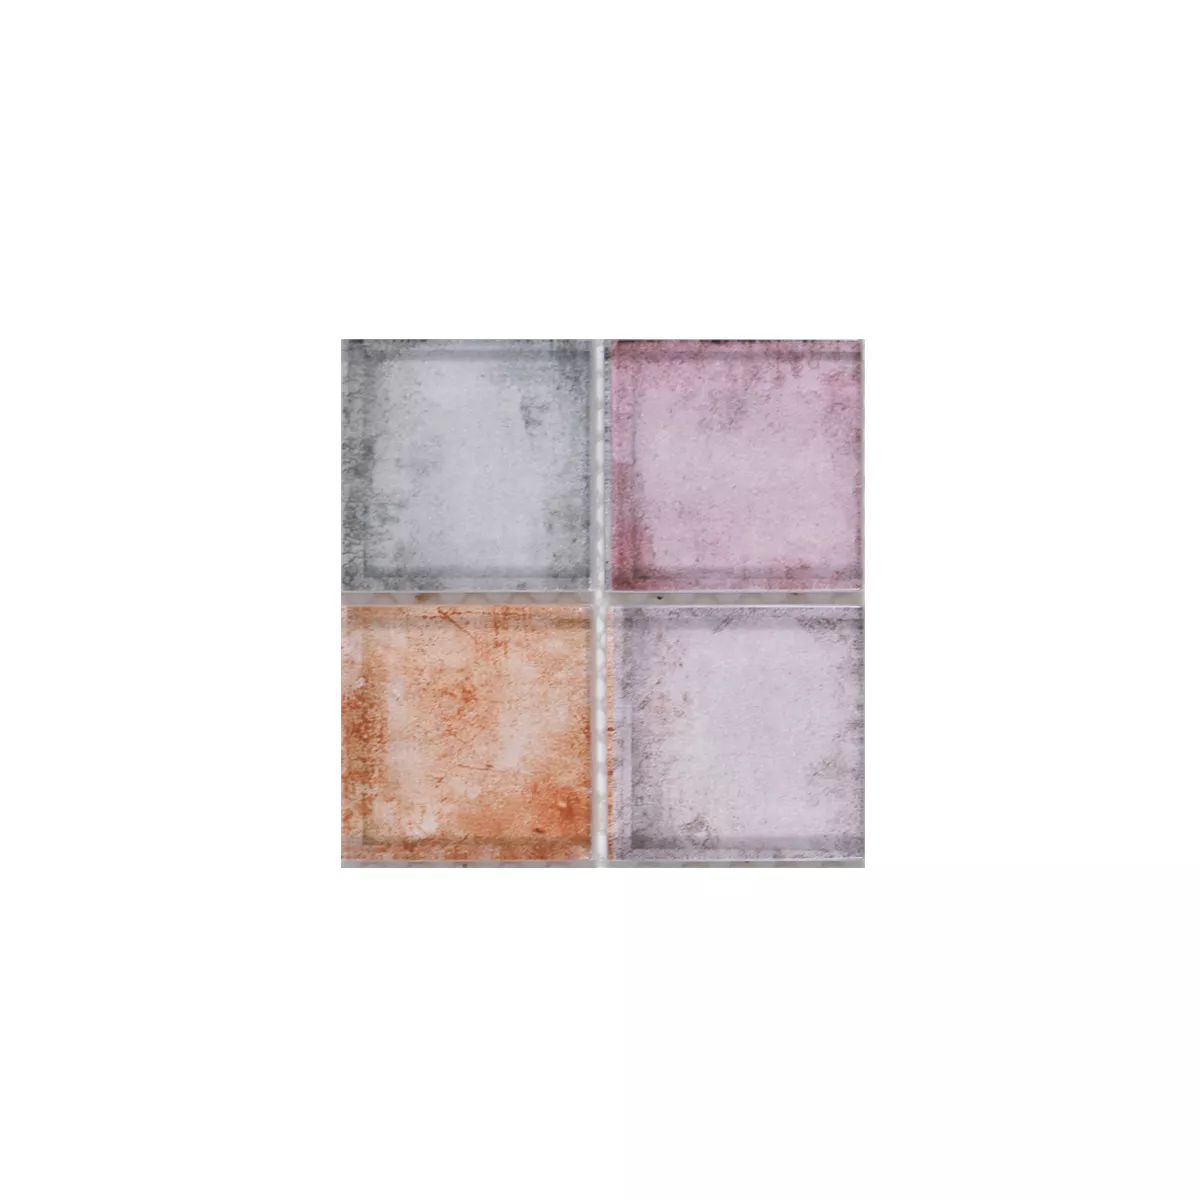 Sample Glass Mosaic Tiles Clementine Colored